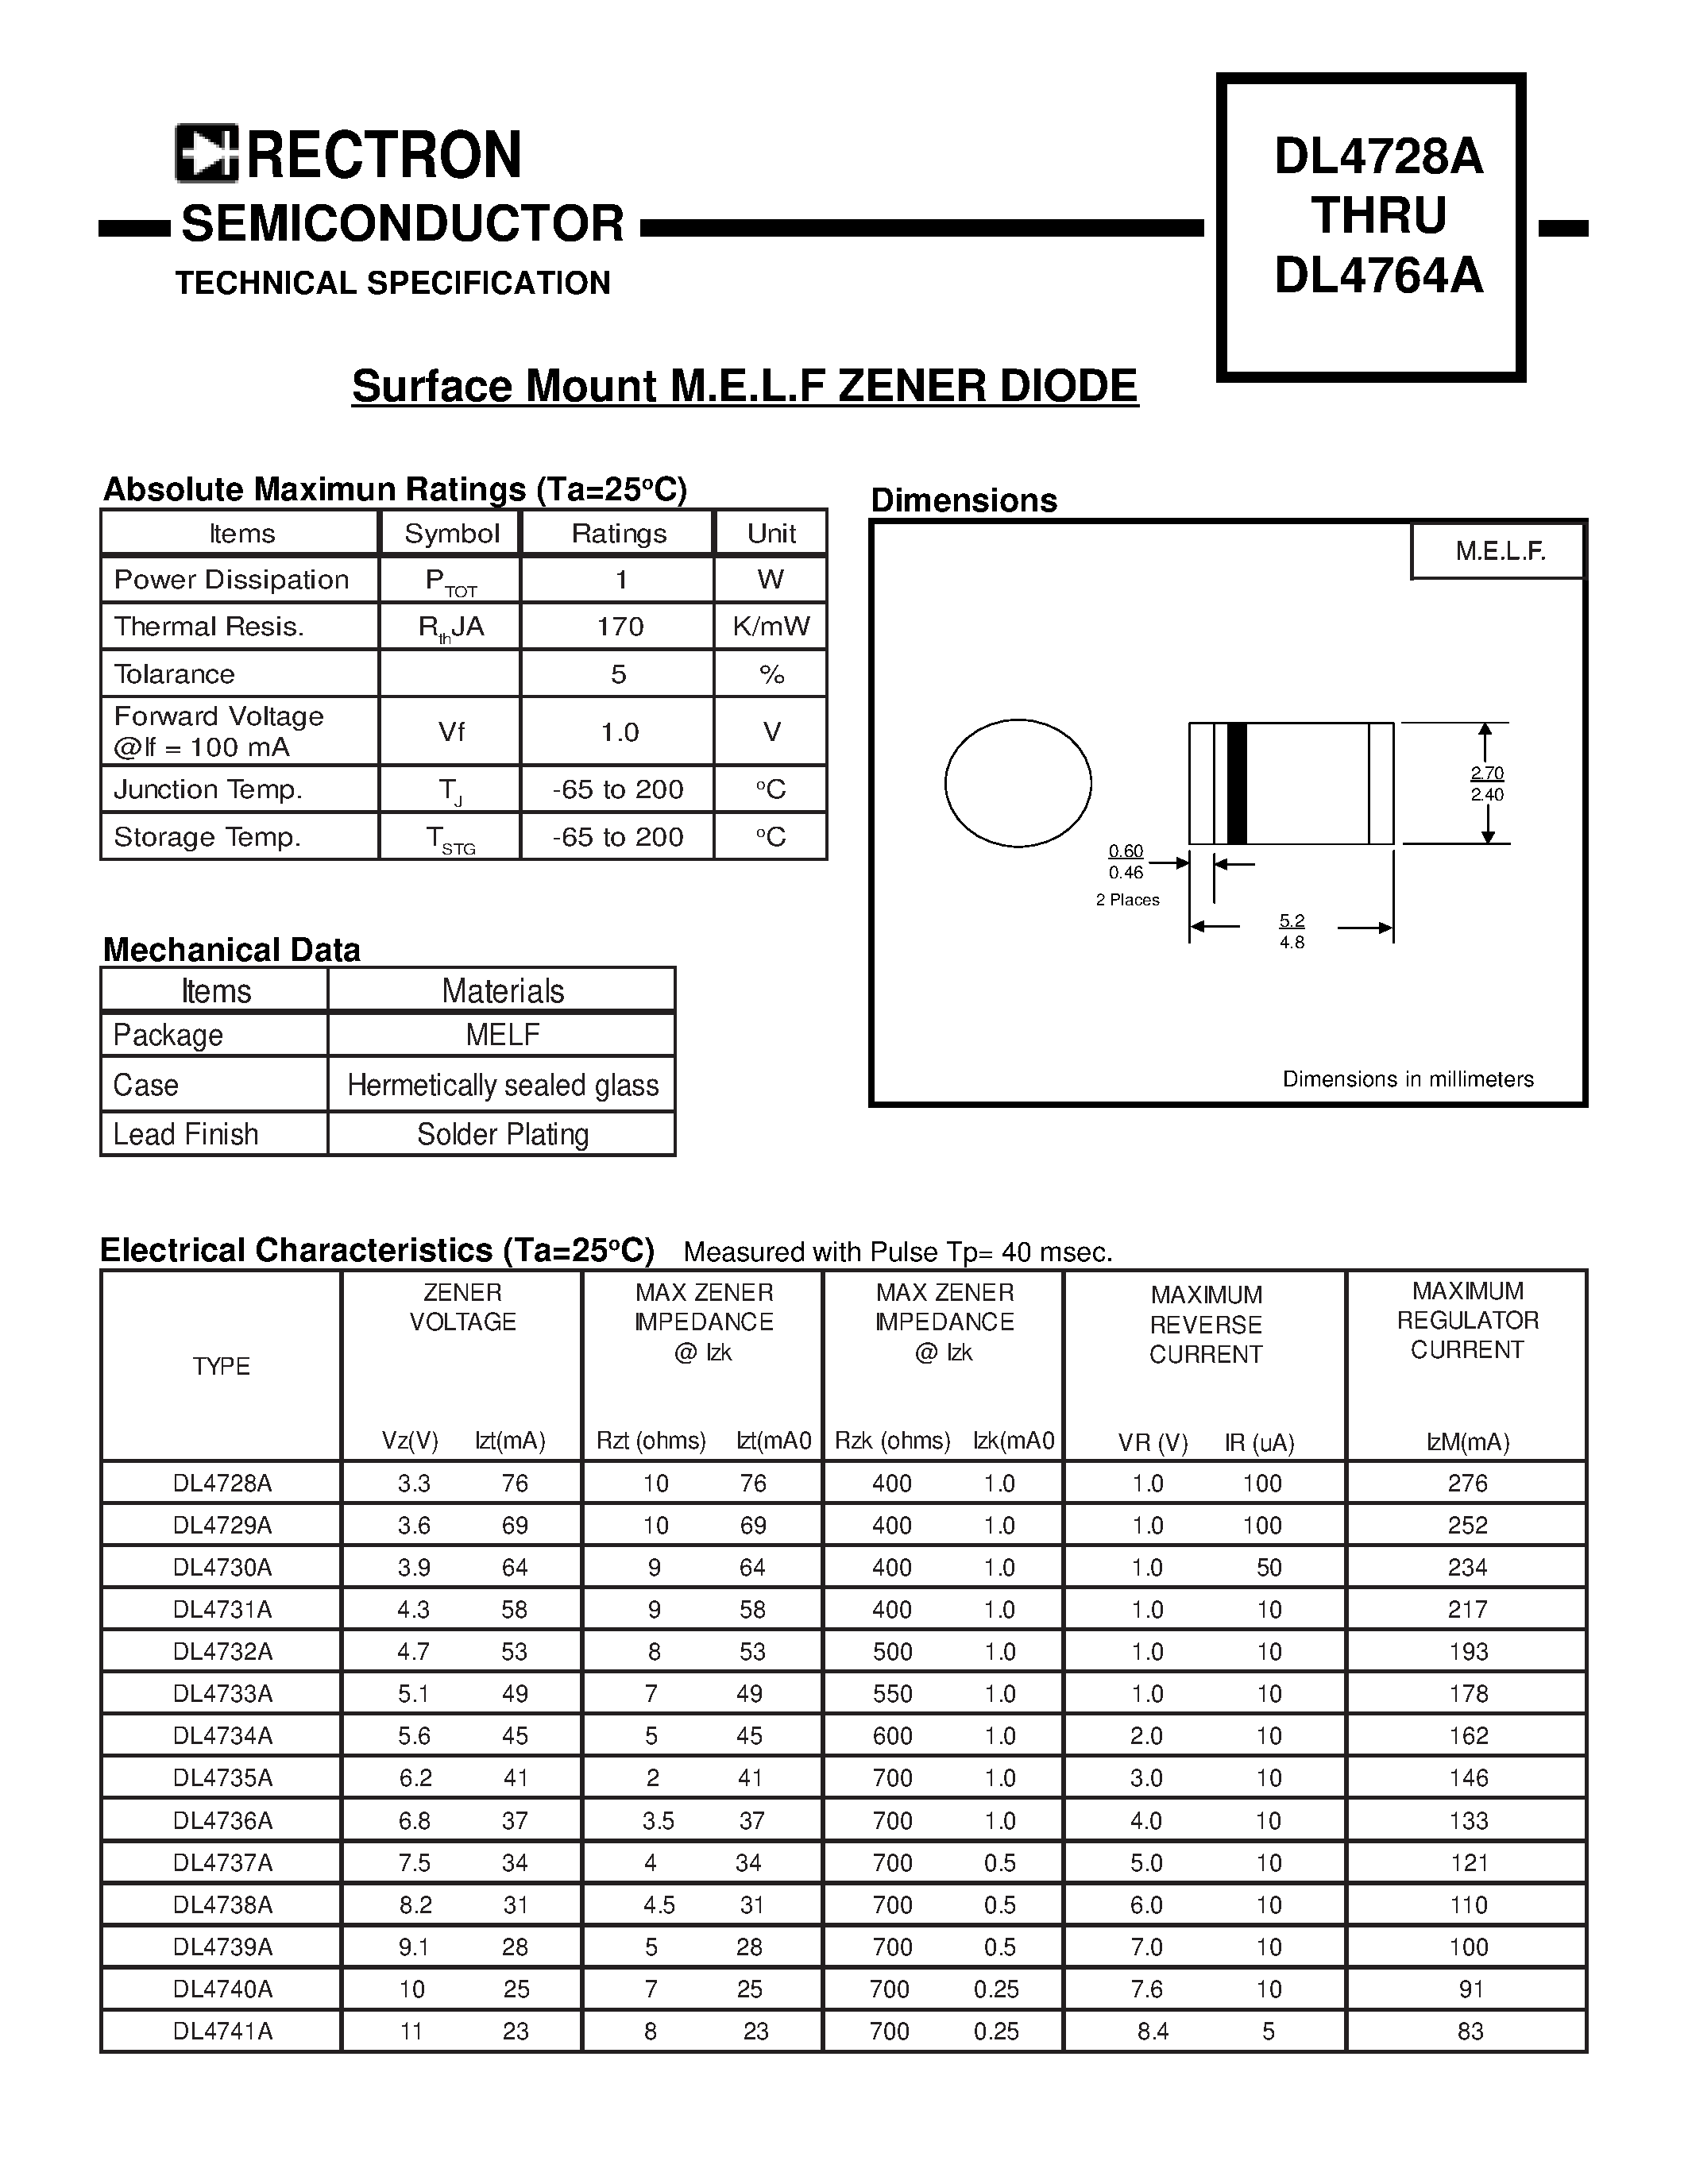 Datasheet DL4748A - Surface Mount M.E.L.F ZENER DIODE page 1